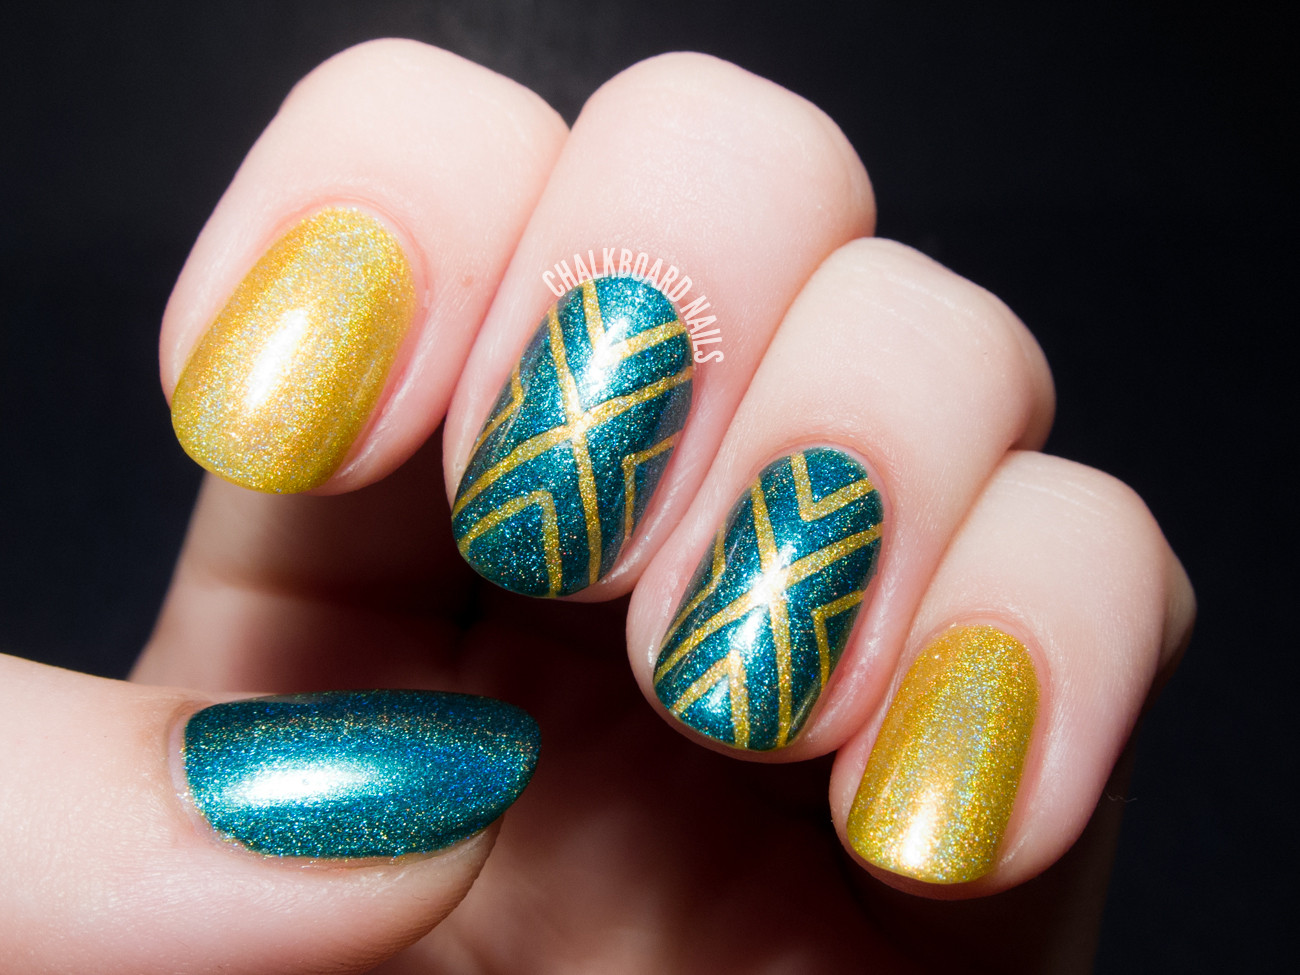 Nail Art With Tape
 Converging Chevrons A Holographic Tape Manicure